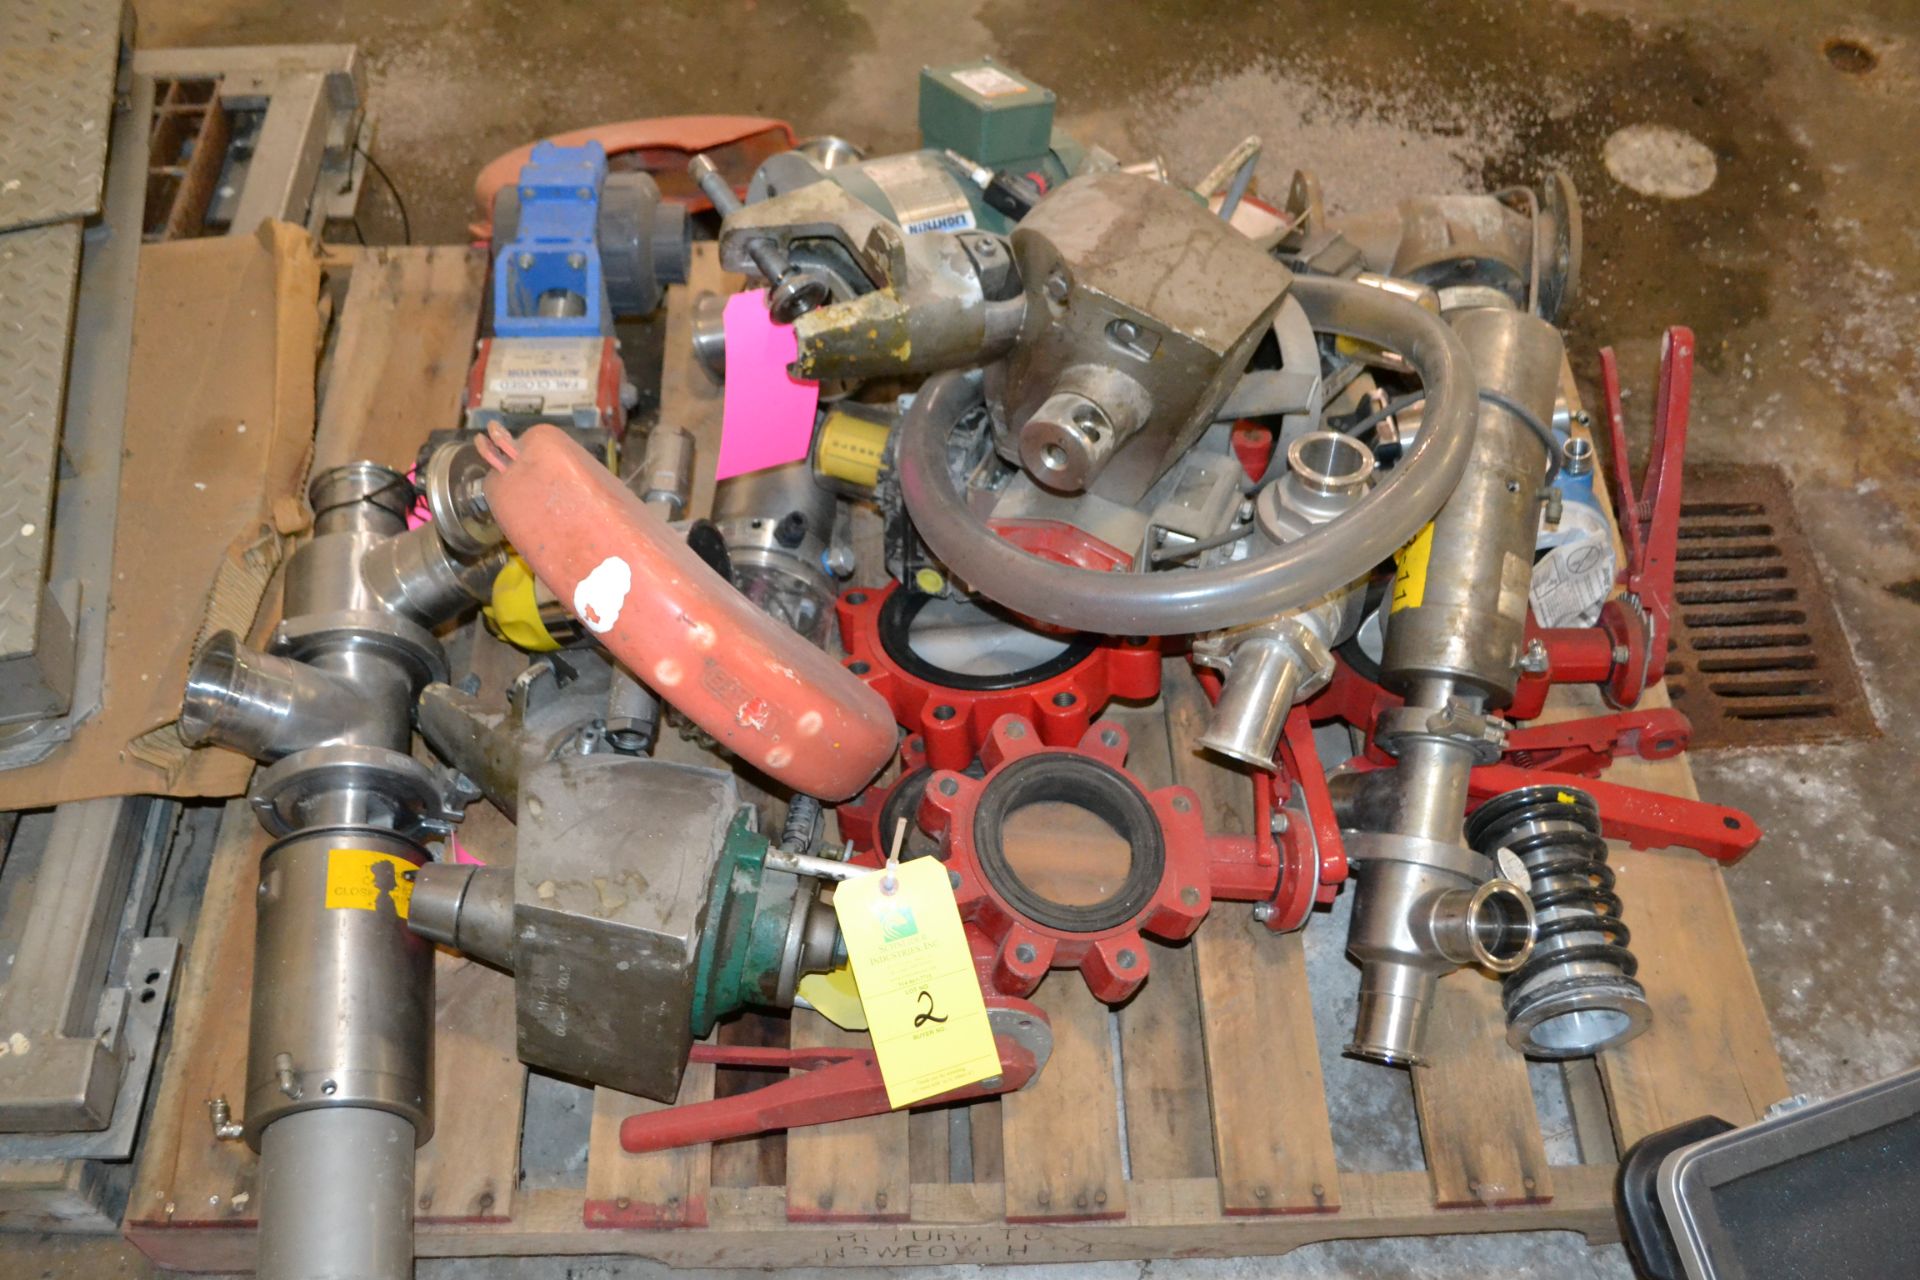 Lot of valves, actuators, and Lightnin' mixer drive and shaft, RIGGING FEE $25 - Image 2 of 3